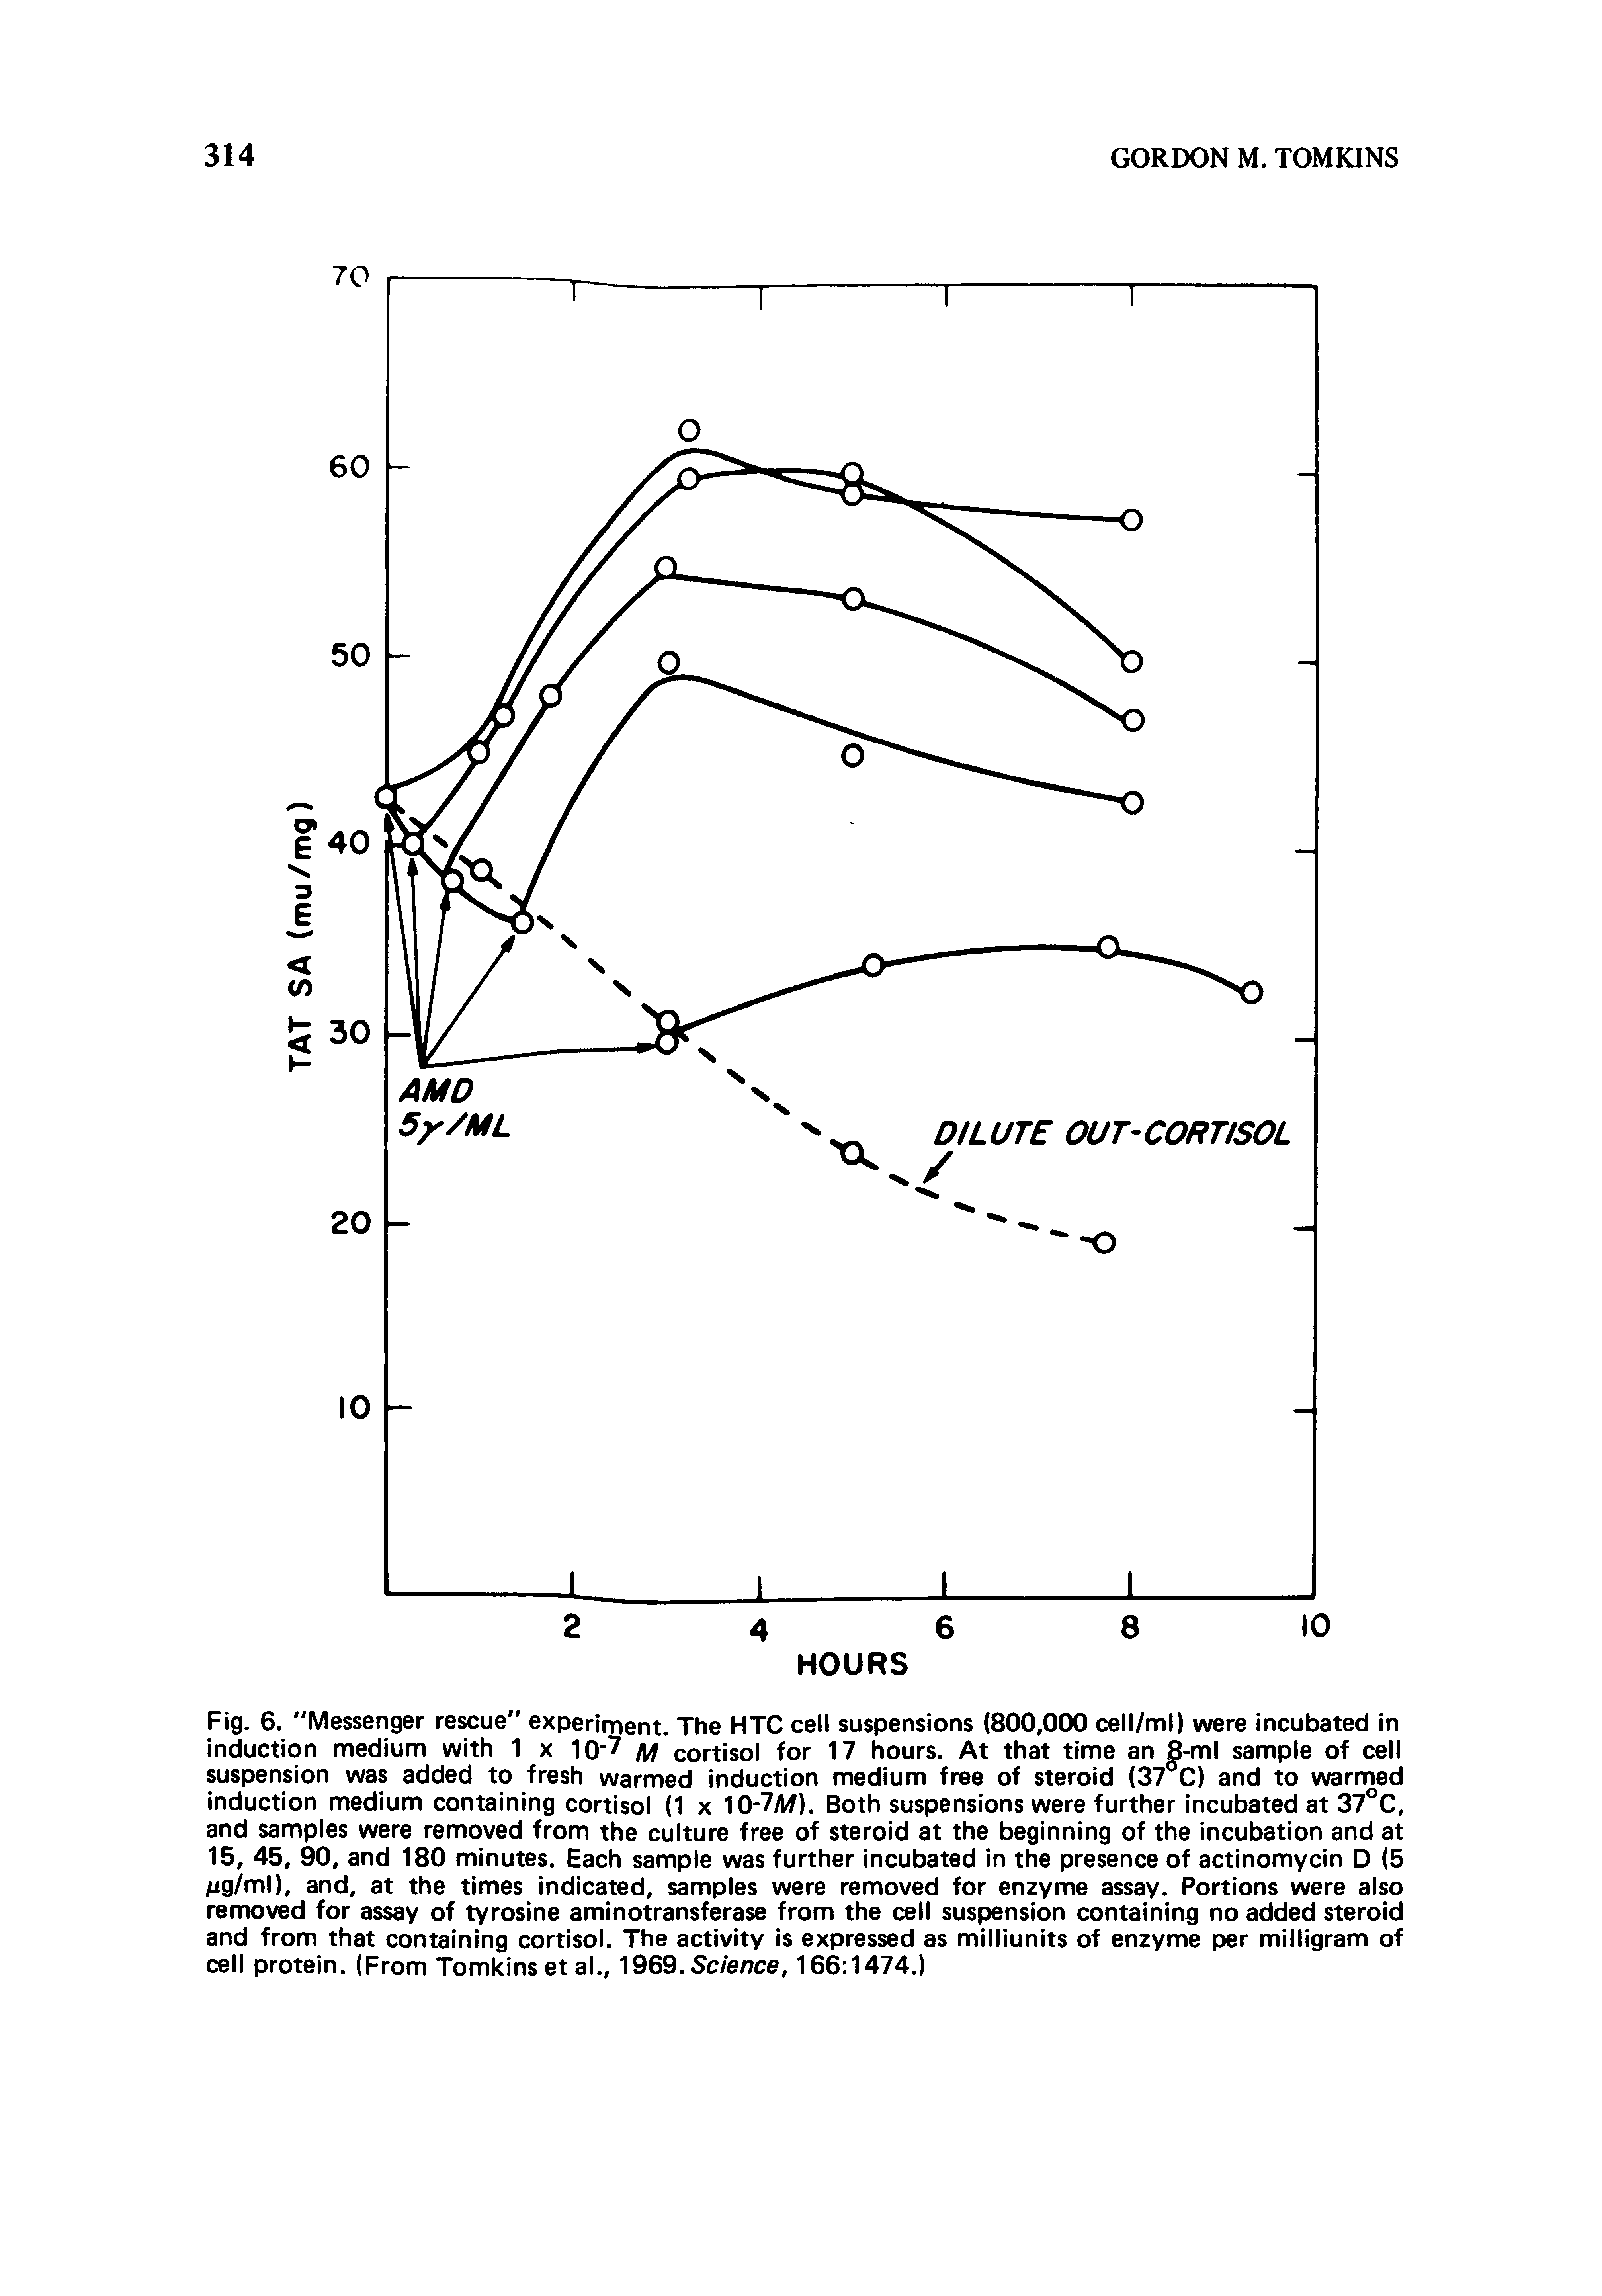 Fig. 6. Messenger rescue" experiment. The HTC cell suspensions (800,000 cell/ml) were incubated in induction medium with 1 x M cortisol for 17 hours. At that time an 8-ml sample of cell suspension was added to fresh warmed induction medium free of steroid (37 C) and to warmed induction medium containing cortisol (1 x Both suspensions were further incubated at 37°C,...